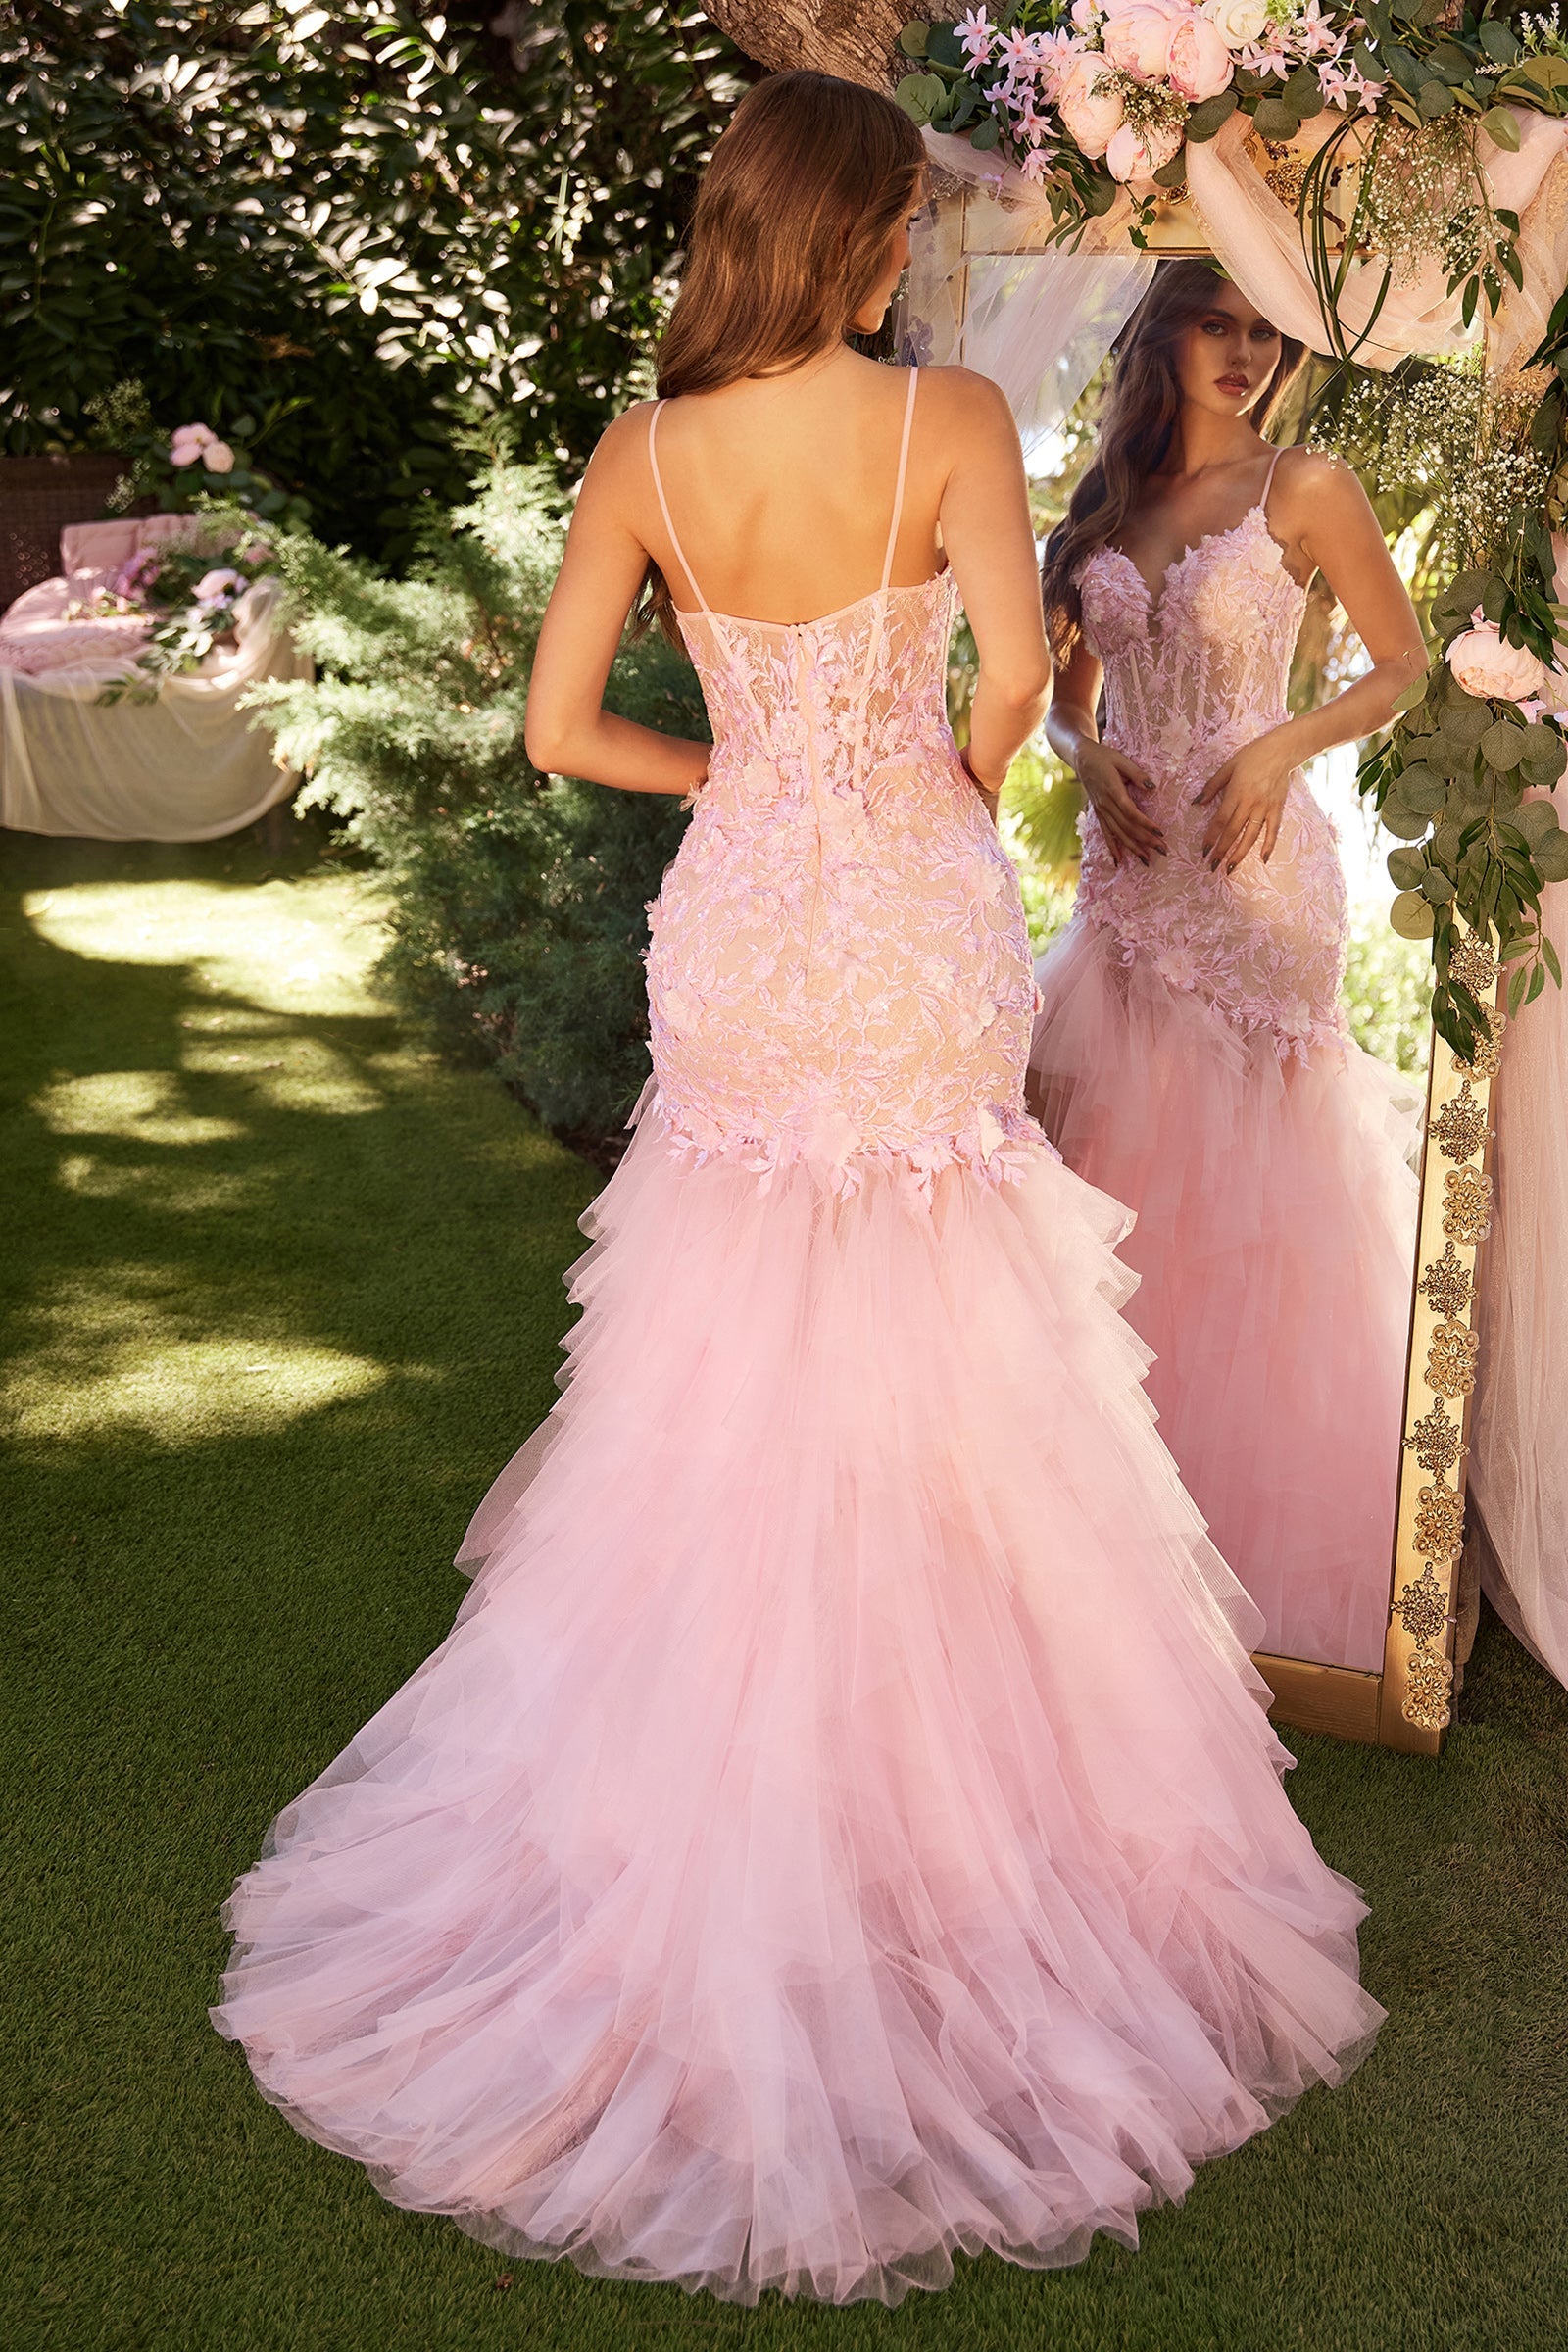 LEXLEY Baby Pink Romantic Floral Applique Tulle Mermaid Prom & Formal Dress